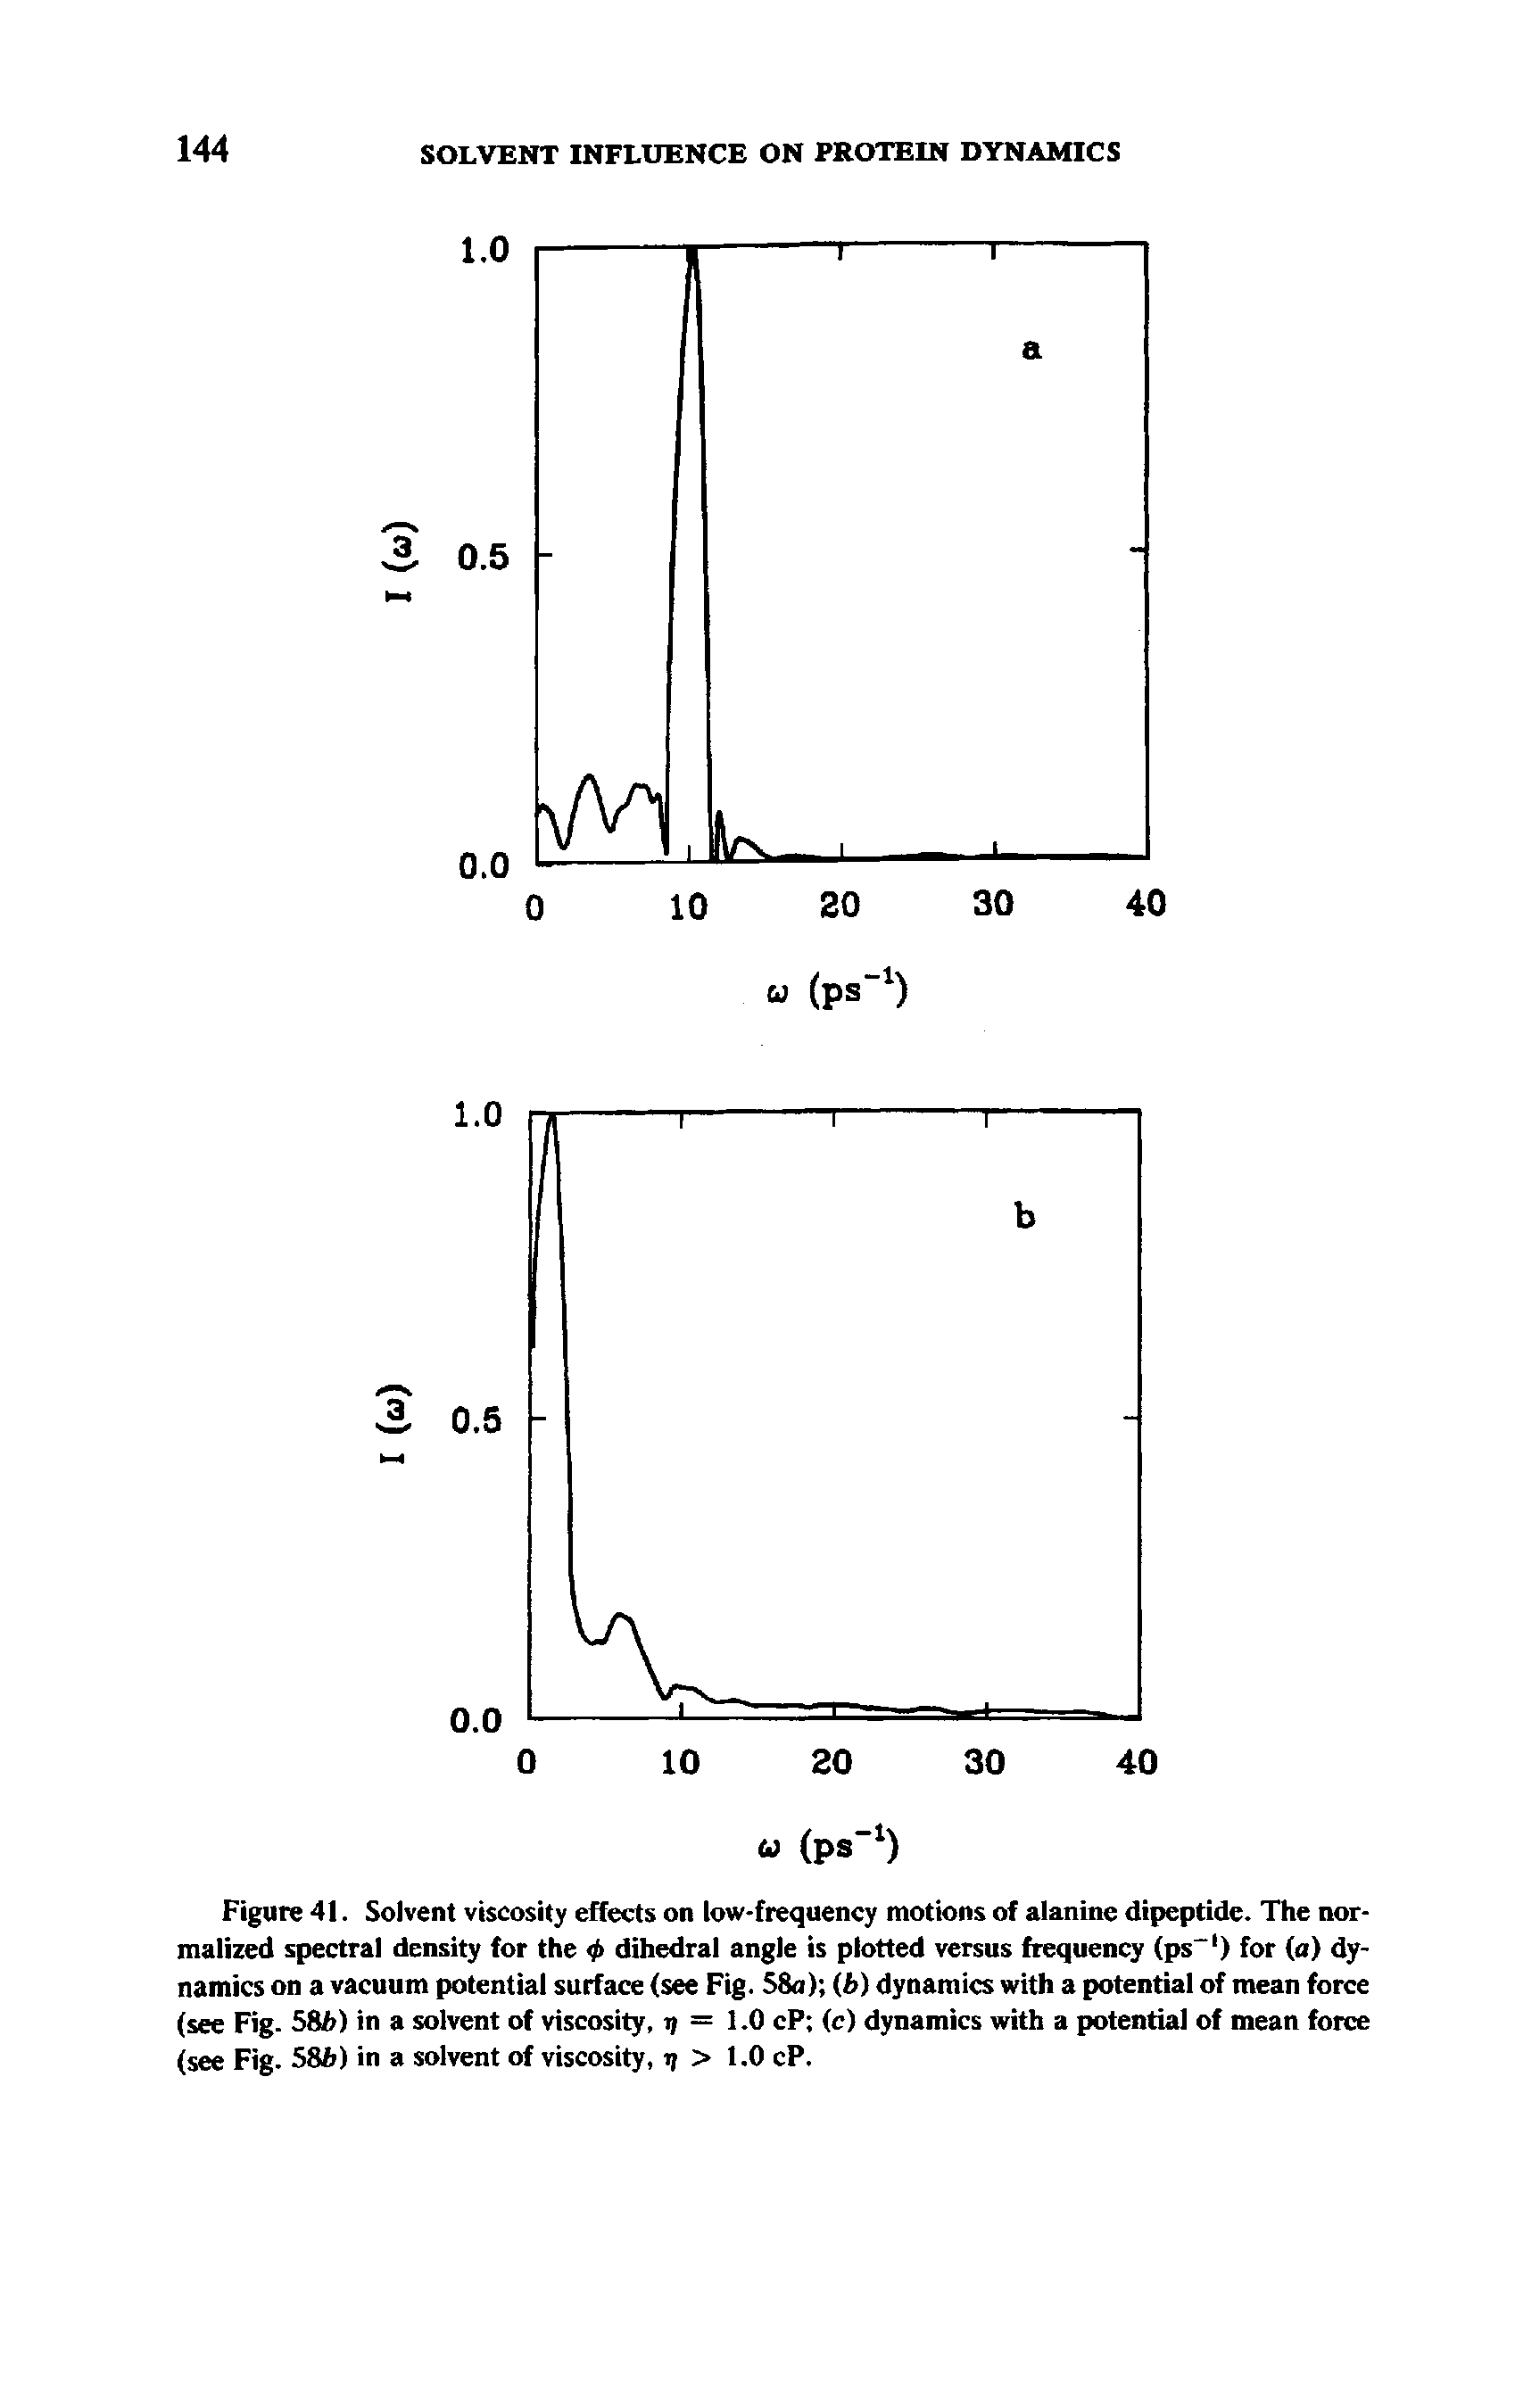 Figure 41. Solvent viscosity effects on low-frequency motions of alanine dipeptide. The normalized spectral density for the <t> dihedral angle is plotted versus frequency (ps 1) for (a) dynamics on a vacuum potential surface (see Fig. 58a) (6) dynamics with a potential of mean force (see Fig. 58b) in a solvent of viscosity, y = 1.0 cP (c) dynamics with a potential of mean force (see Fig. 586) in a solvent of viscosity, ij > 1.0 cP.